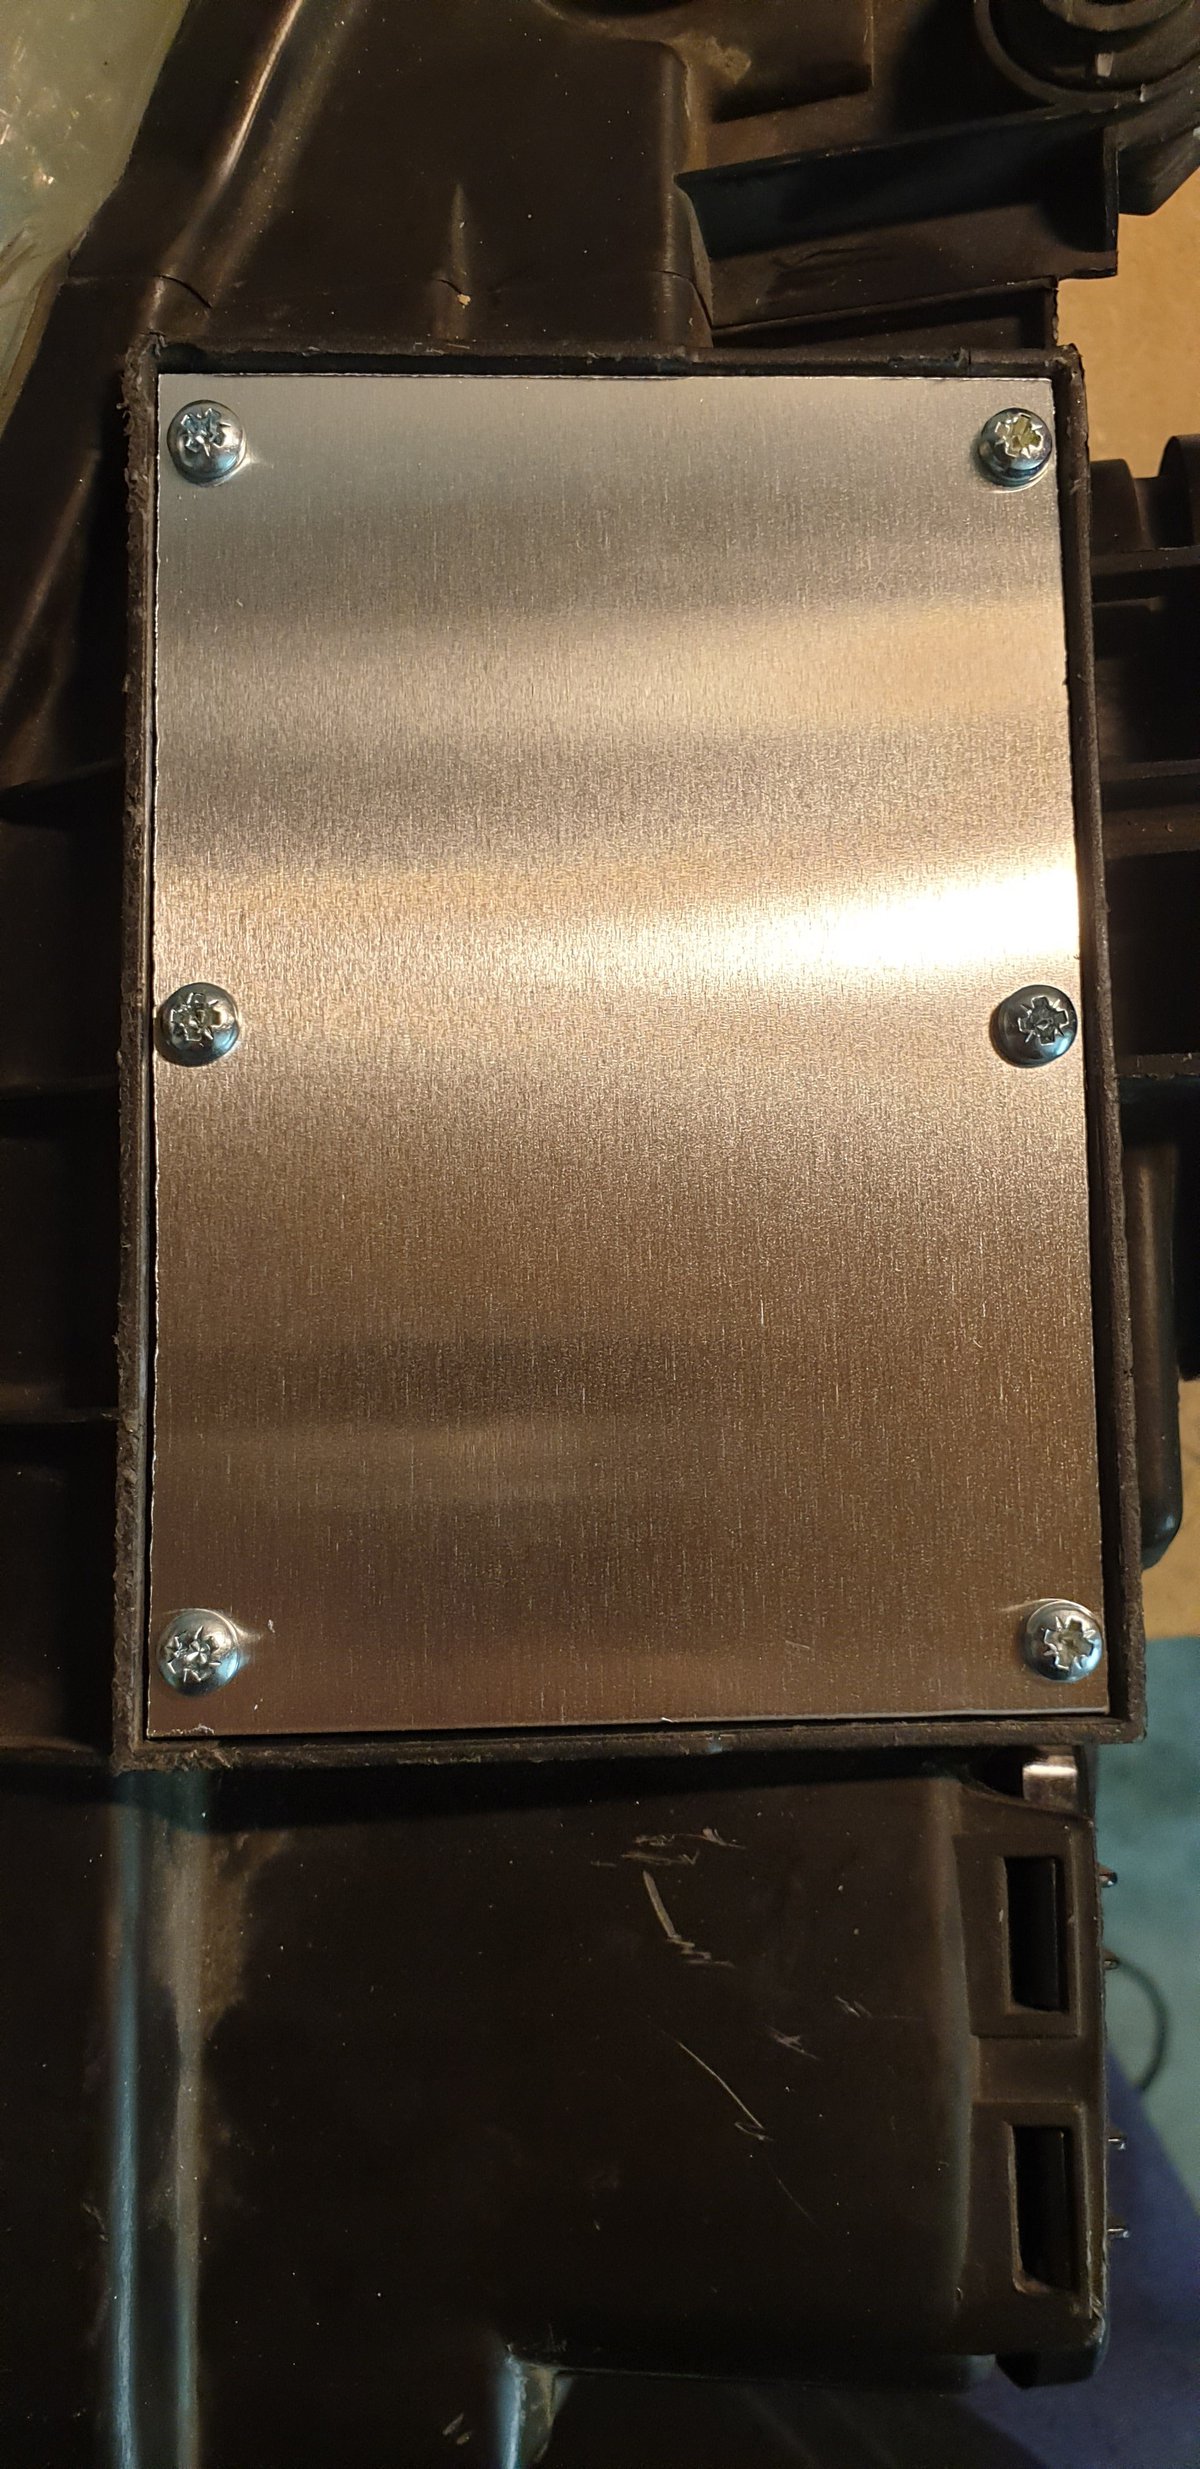 Cover plate